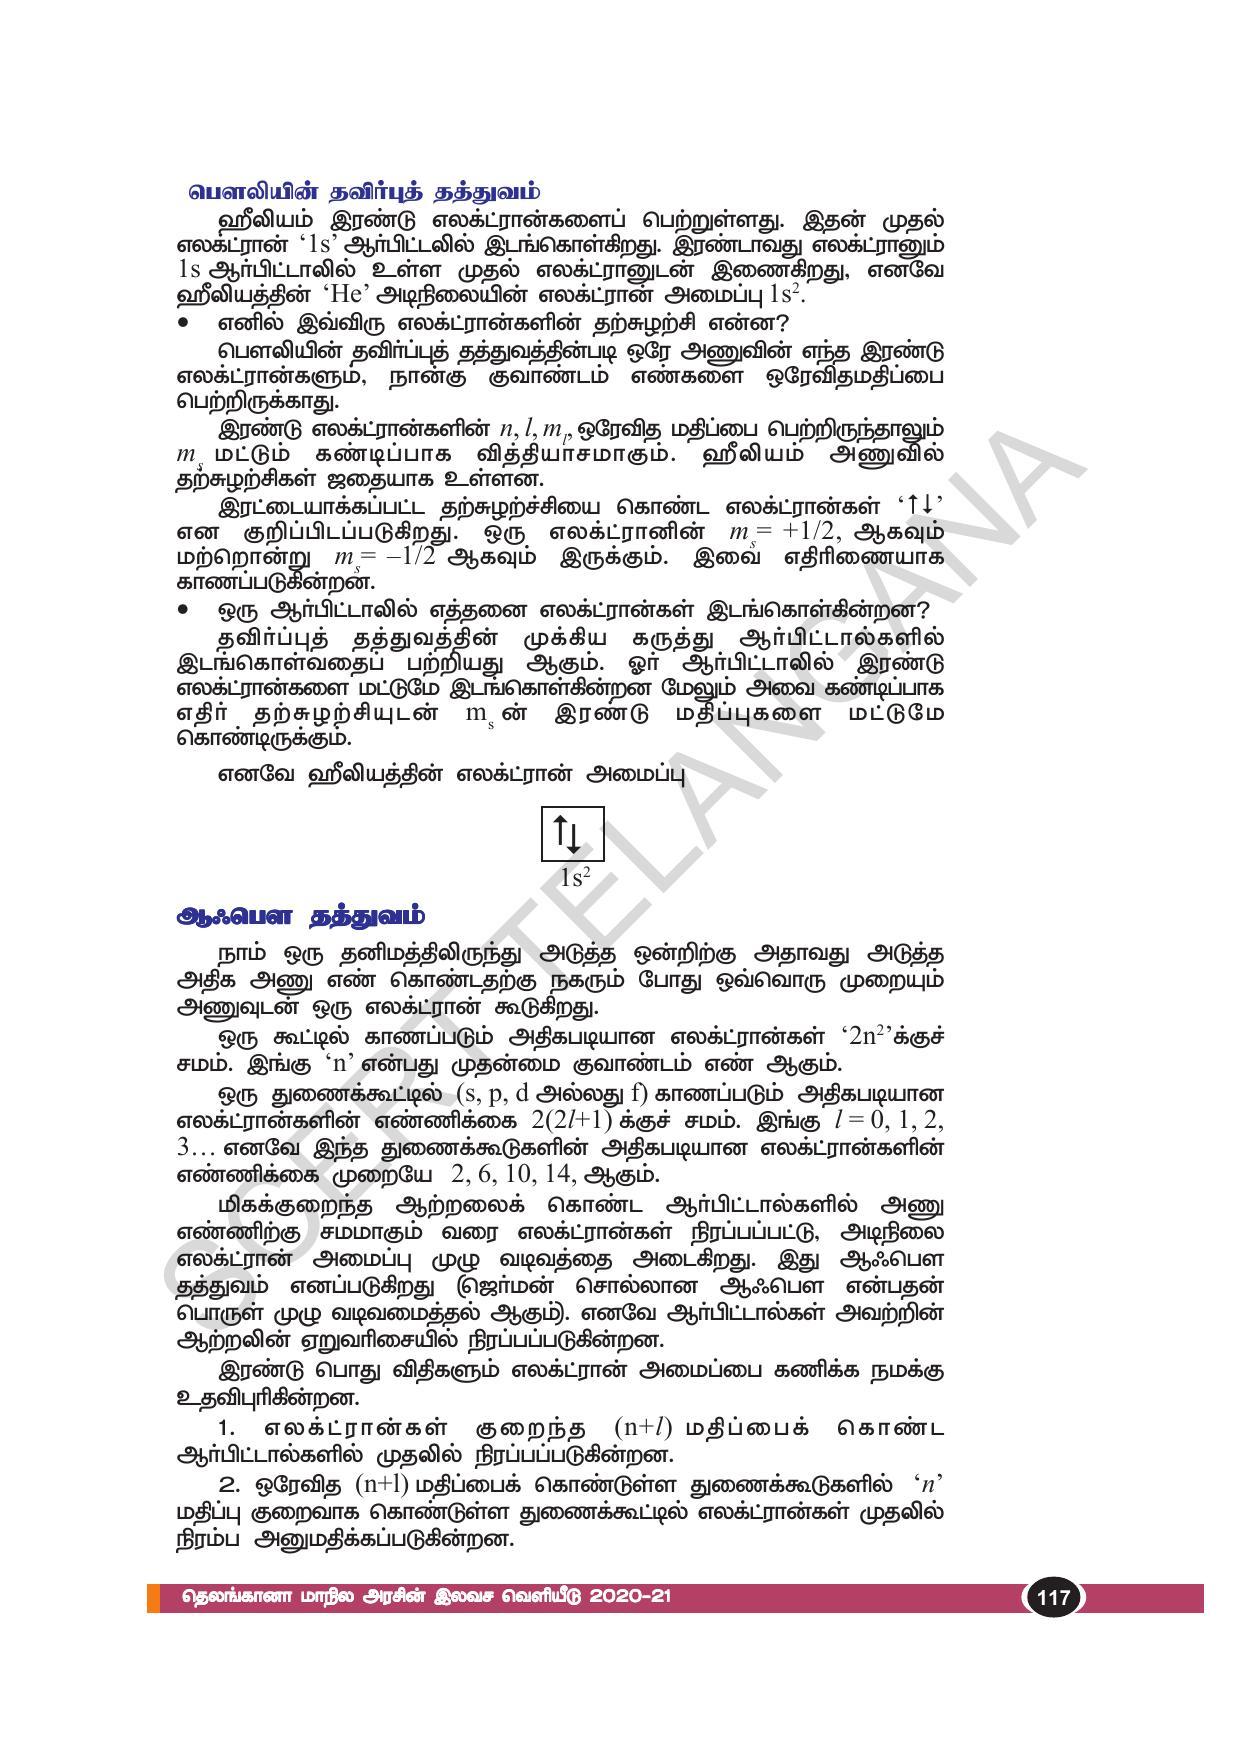 TS SCERT Class 10 Physical Science(Tamil Medium) Text Book - Page 129